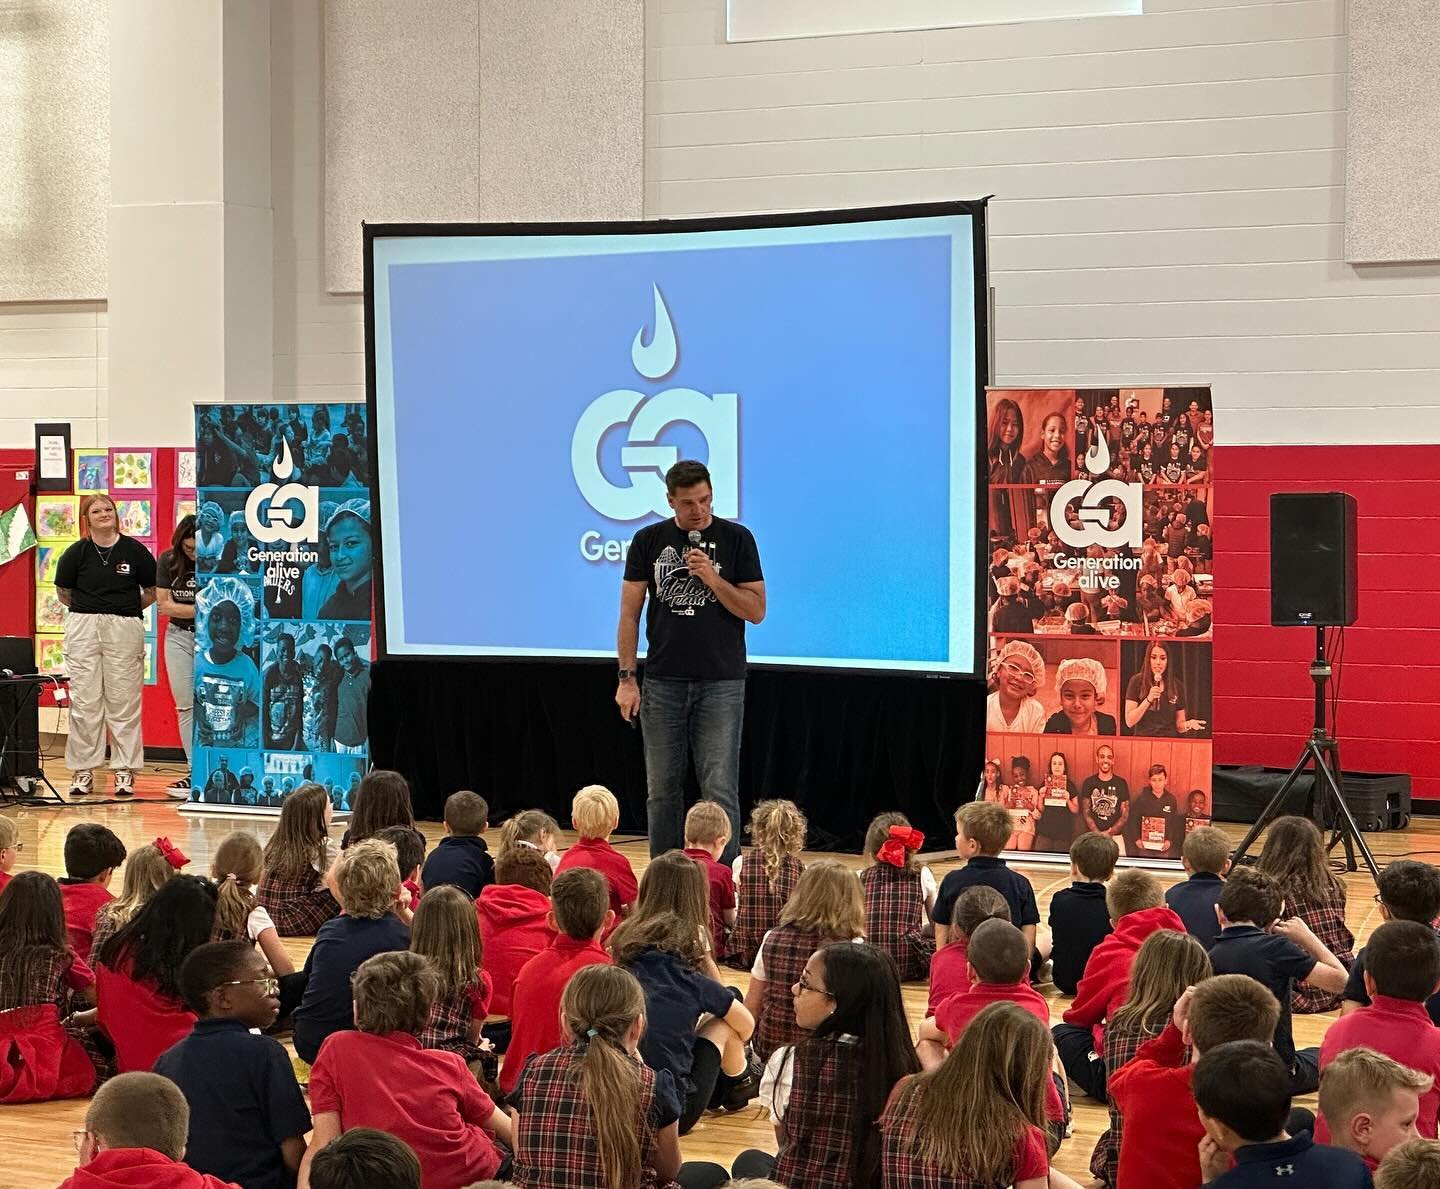 Today our school kicked off our Generation Alive partnership with an assembly! We are excited to partner with Generation Alive to help students and families in Spokane who are food insecure. Our call to action is to raise funds over the next four wee